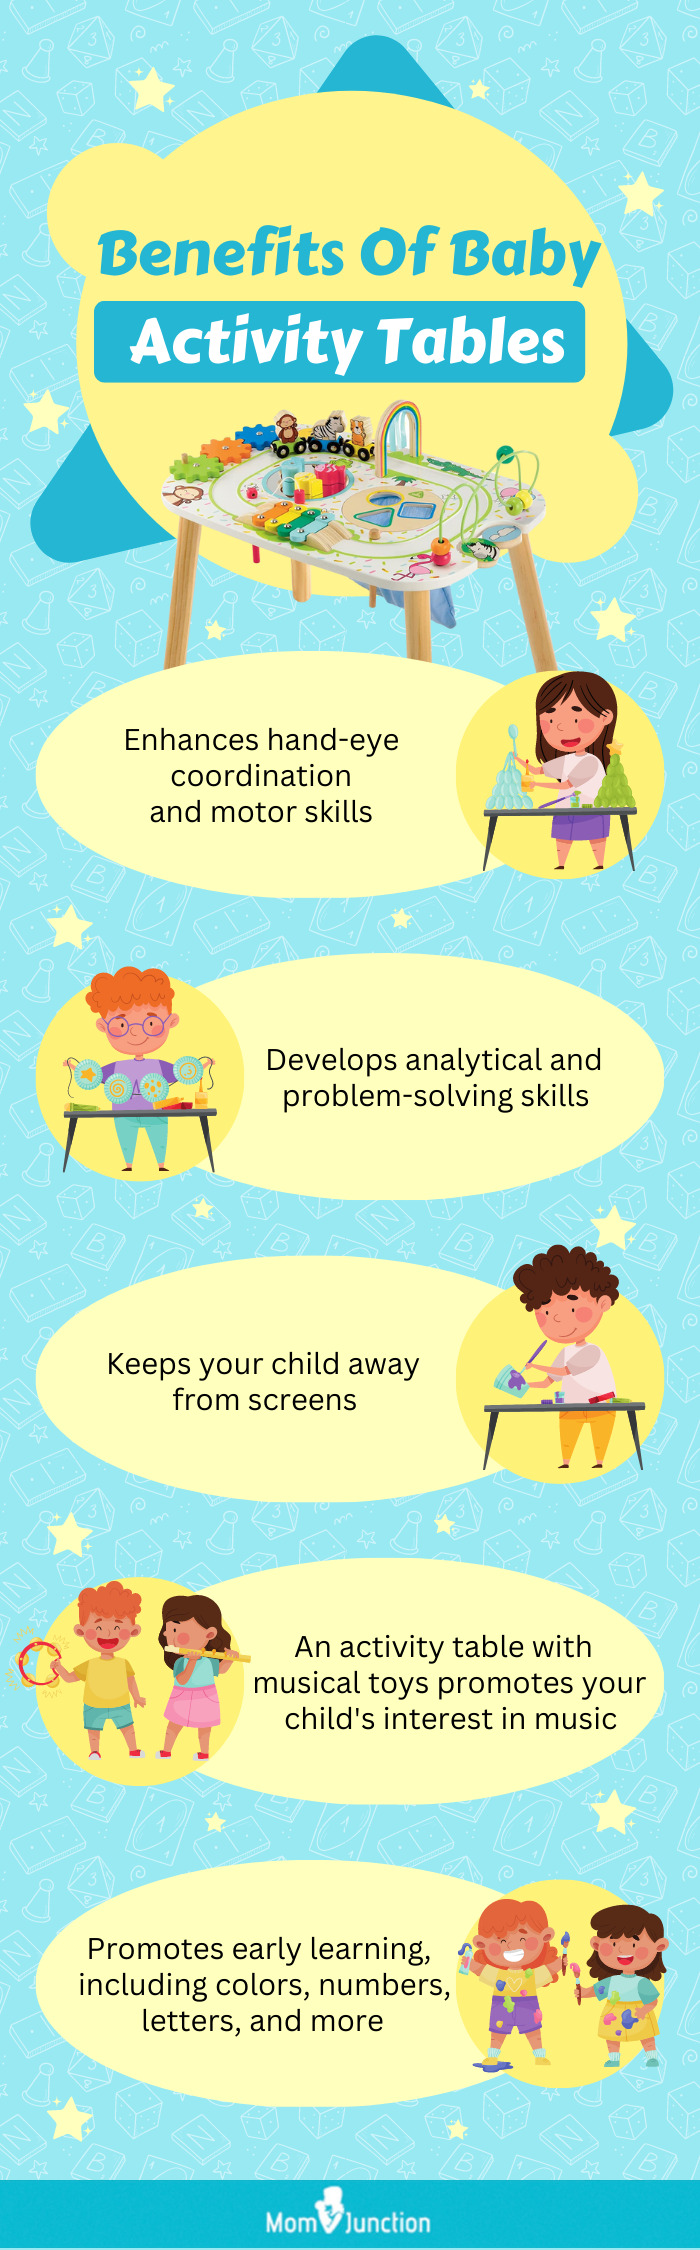 Benefits Of Baby Activity Tables (Infographic)